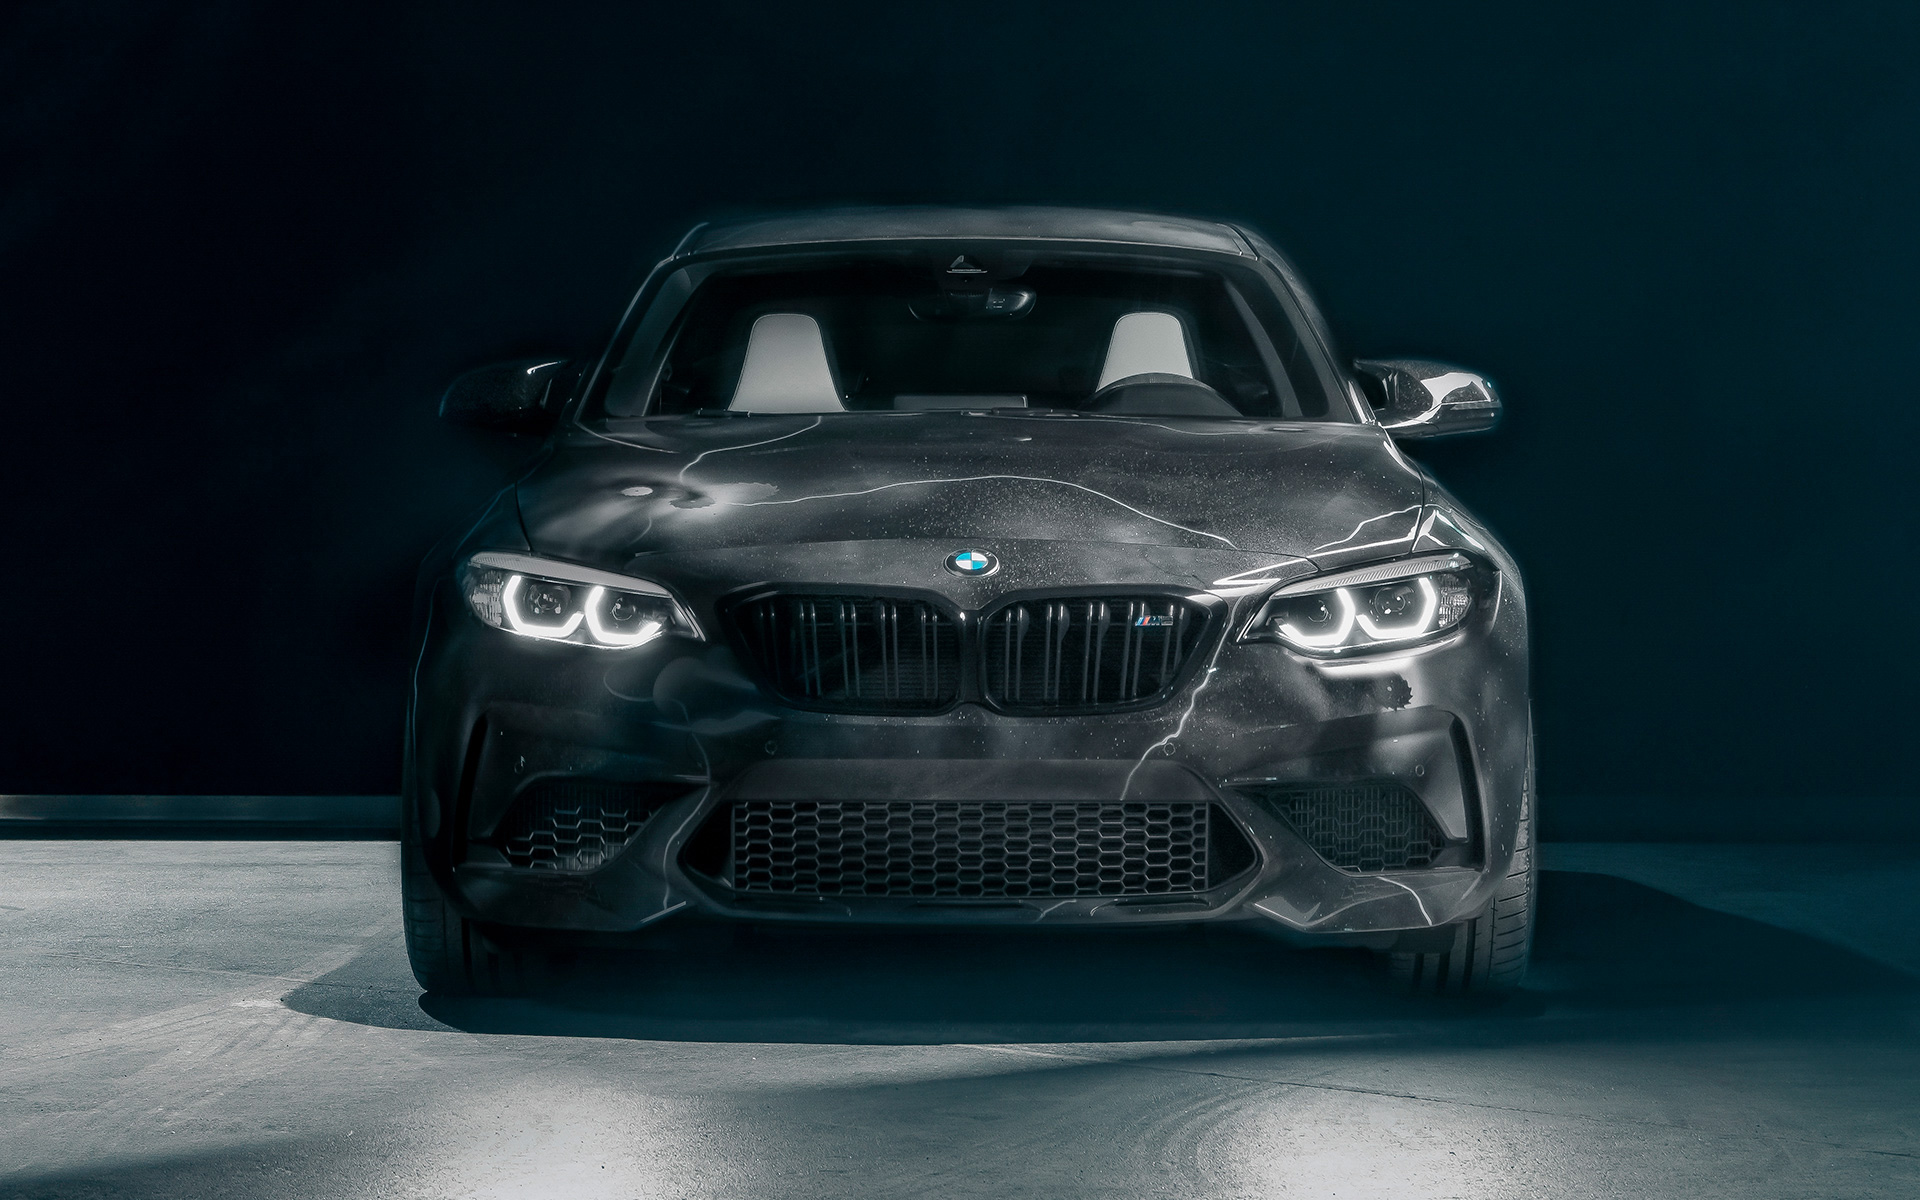 BMW M2 Edition designed by FUTURA 2000 F87 2020 front view against black background